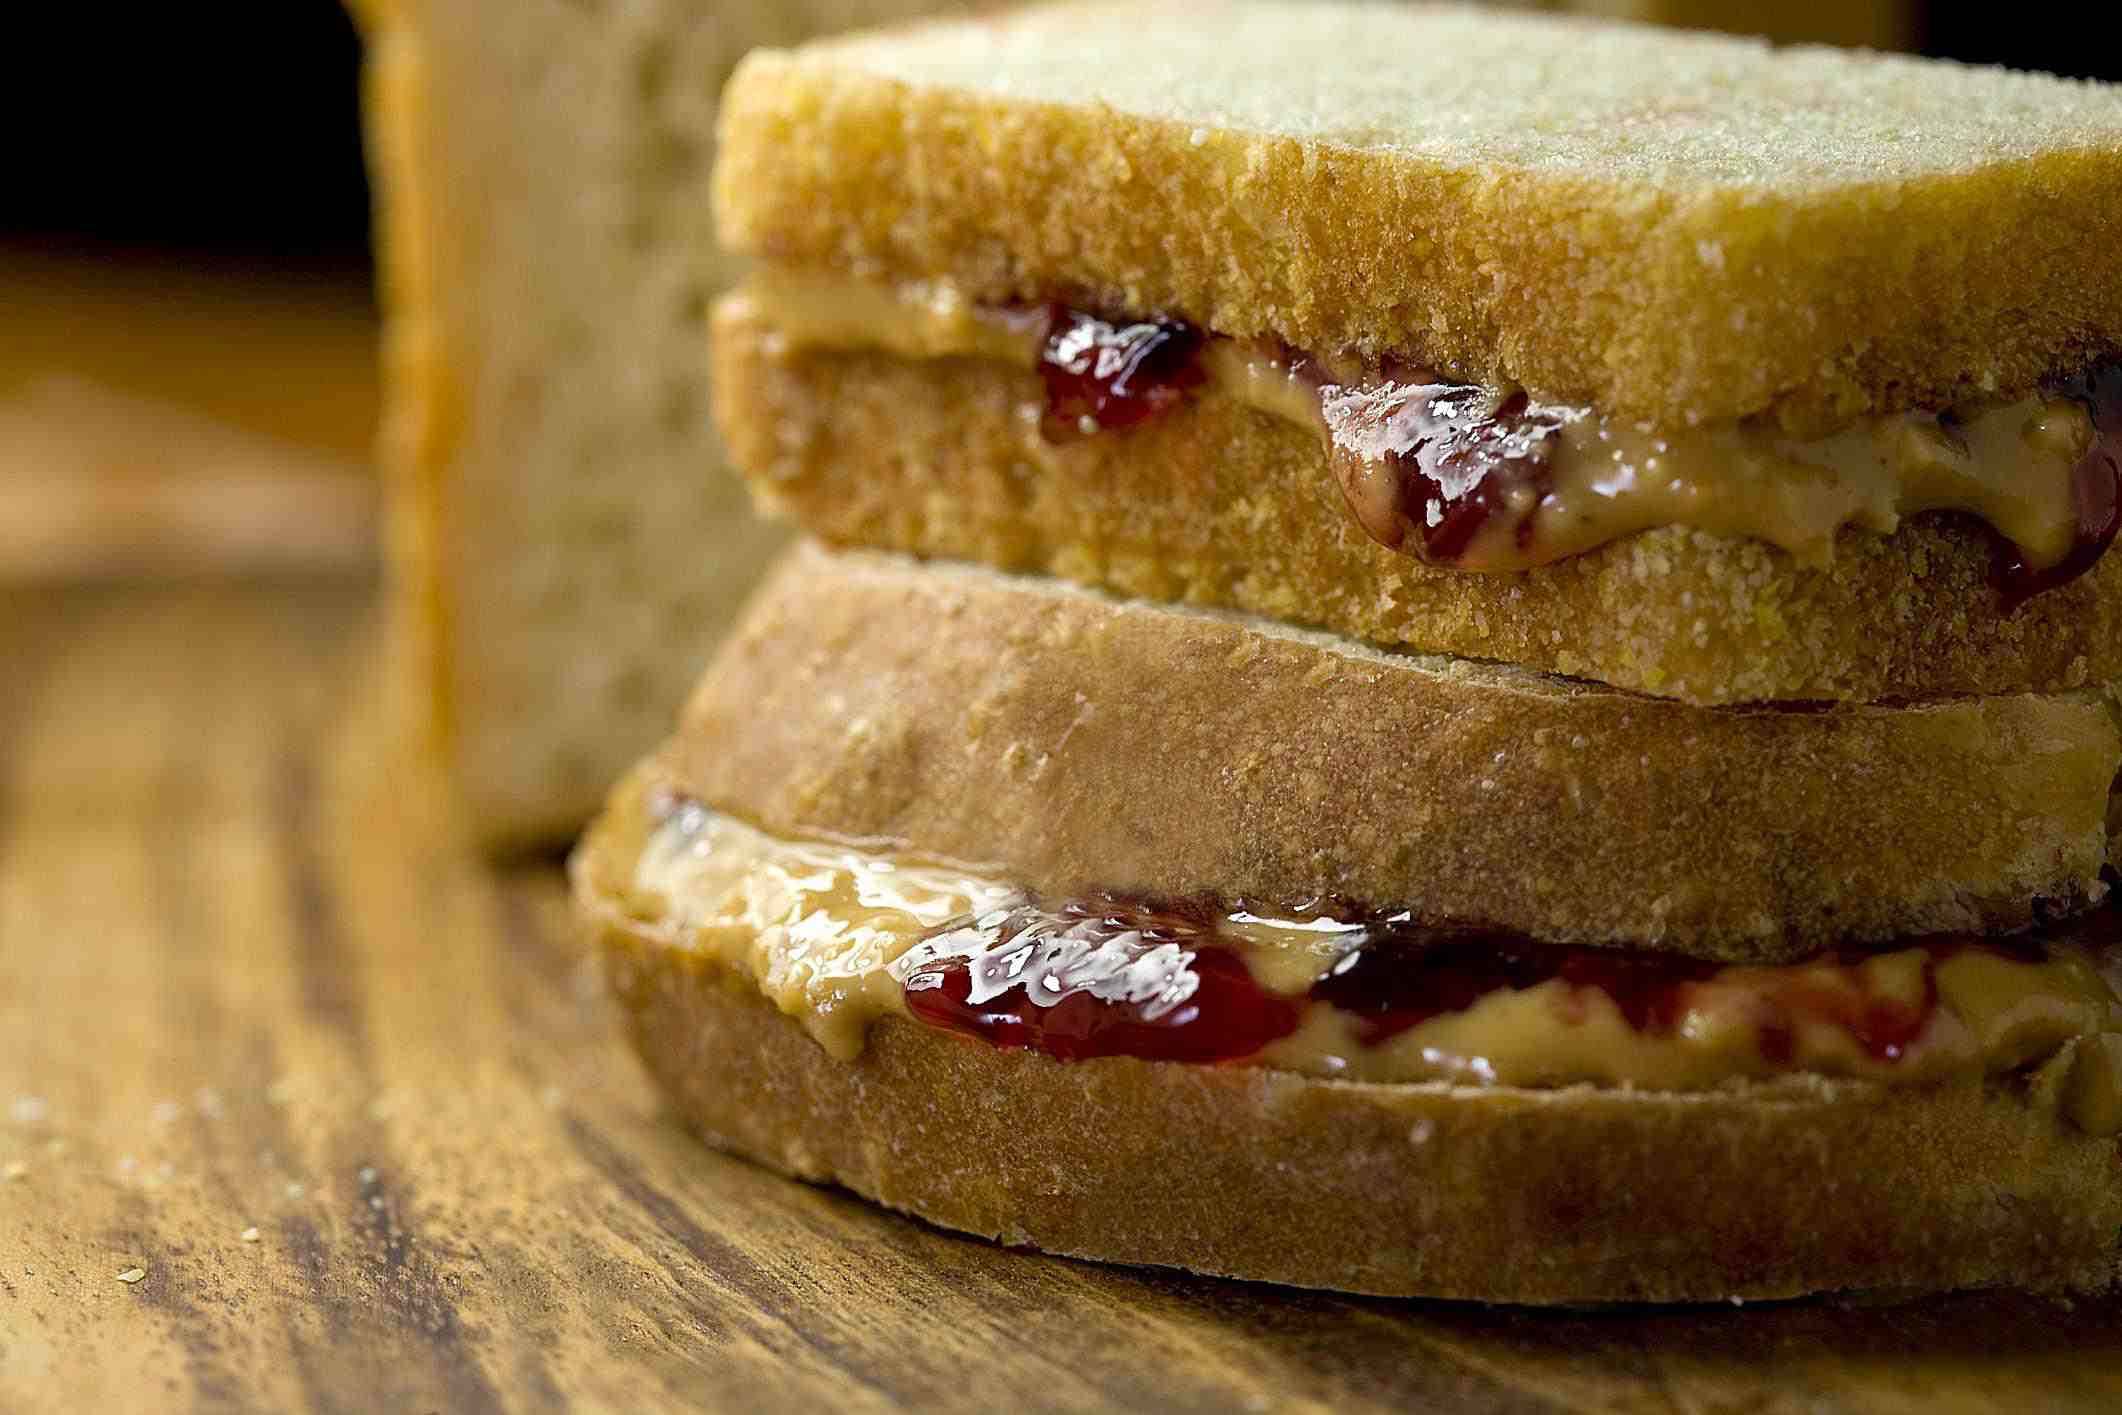 How To Make An Artisan PB&J Sandwich From Scratch | Le Chef Gourmand